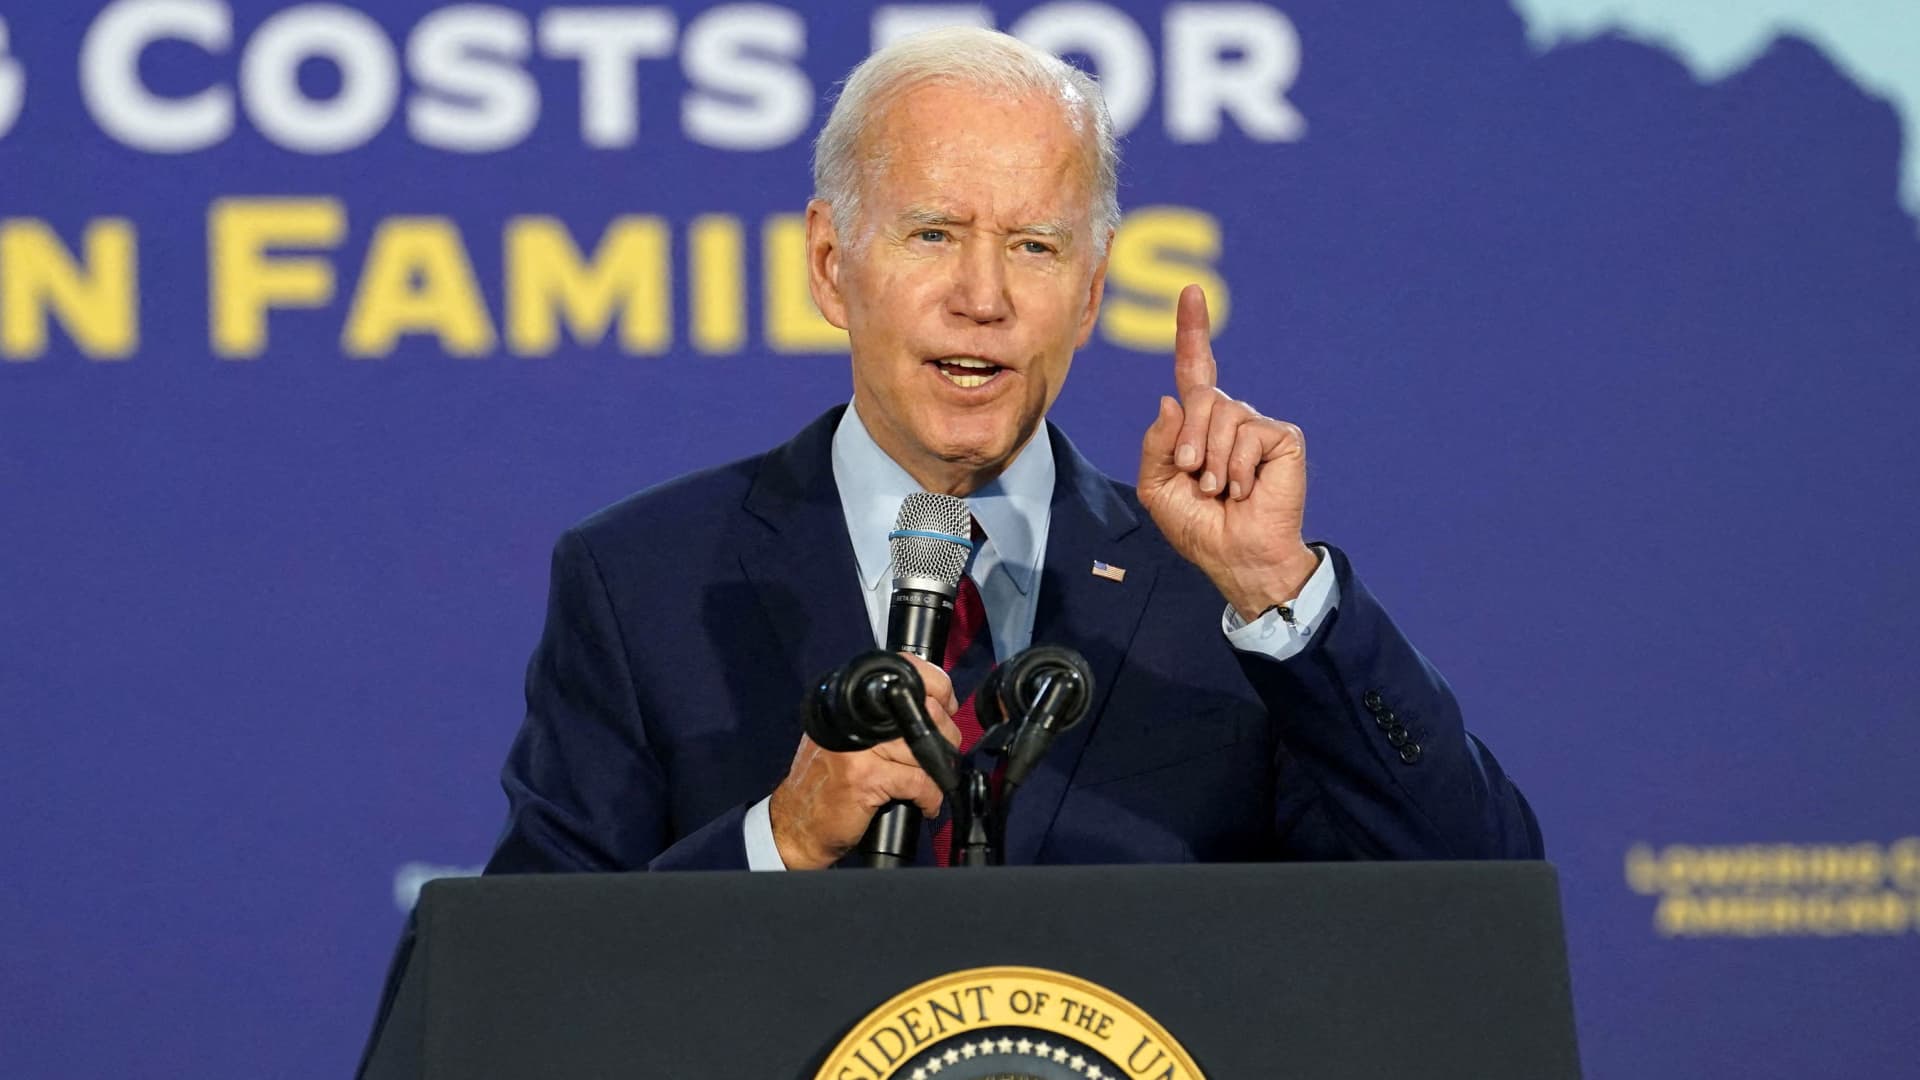 President Joe Biden speaks about protecting Social Security, Medicare, and lowering prescription drug costs, during a visit to OB Johnson Park and Community Center, in Hallandale Beach, Florida, on Nov. 1, 2022.